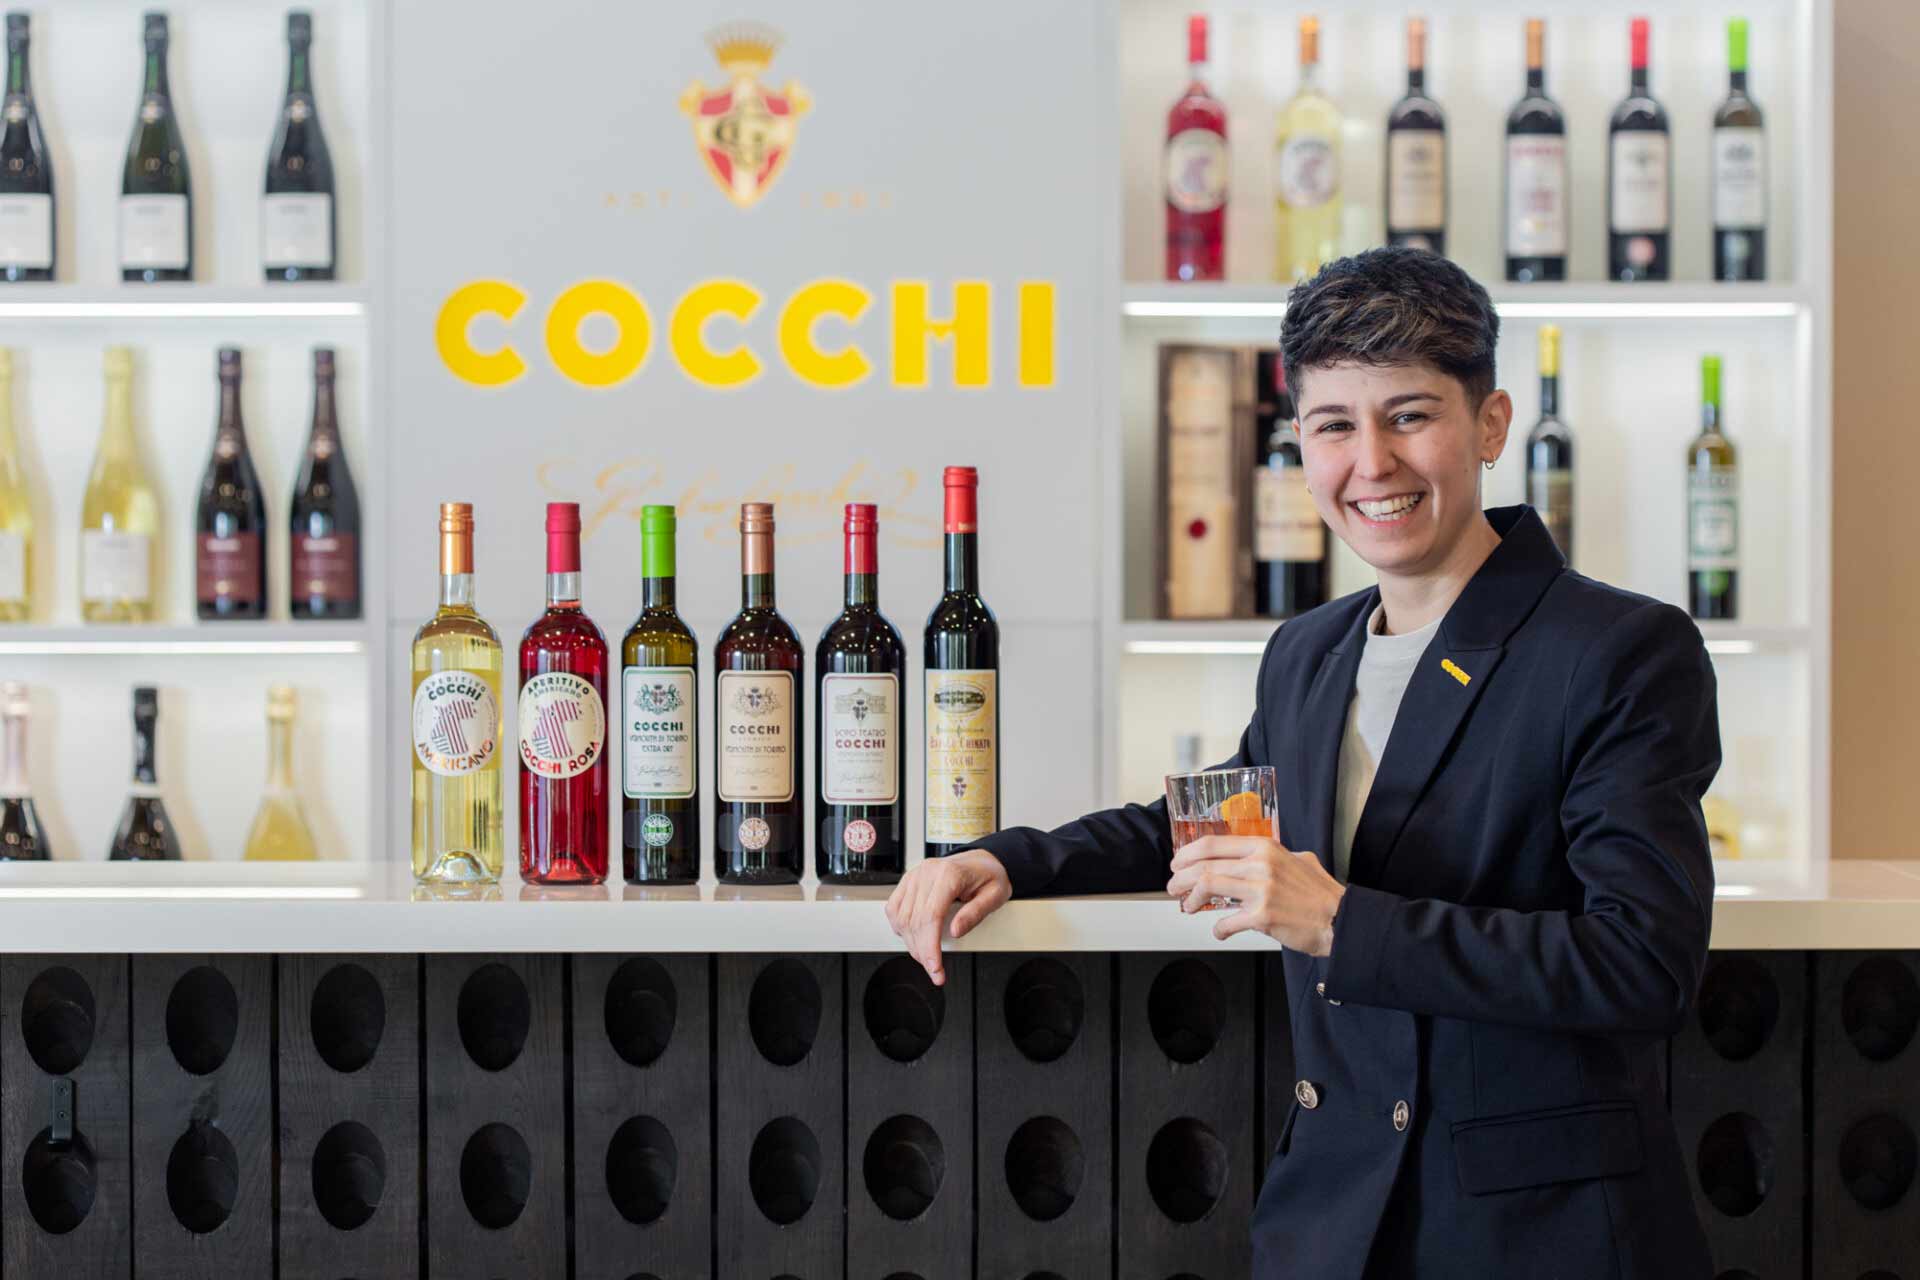 Cocchi advocacy manager